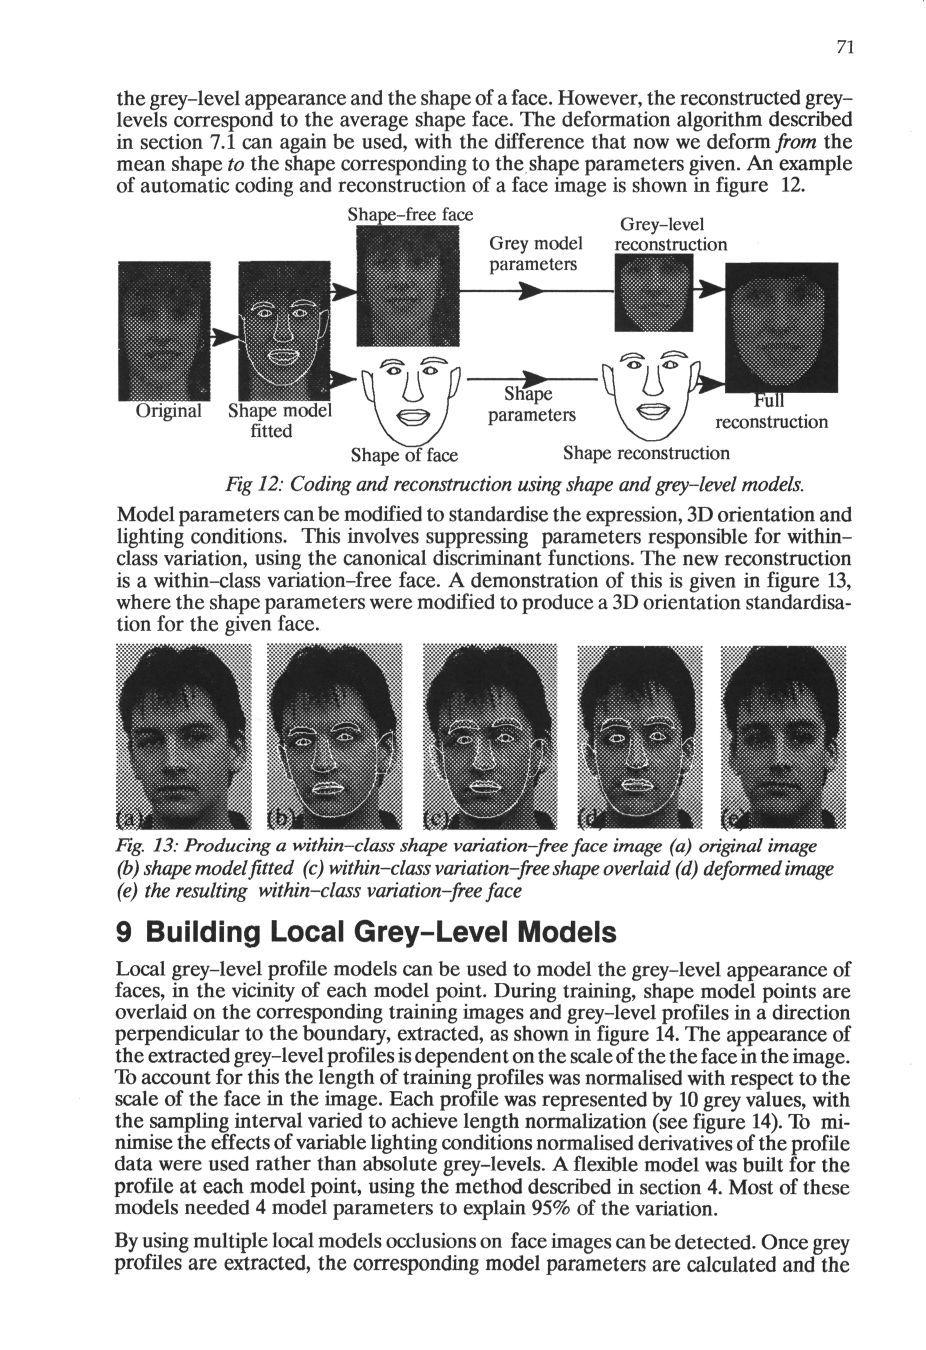 the grey-level appearance and the shape of a face. However, the reconstructed greylevels correspond to the average shape face. The deformation algorithm described in section 7.